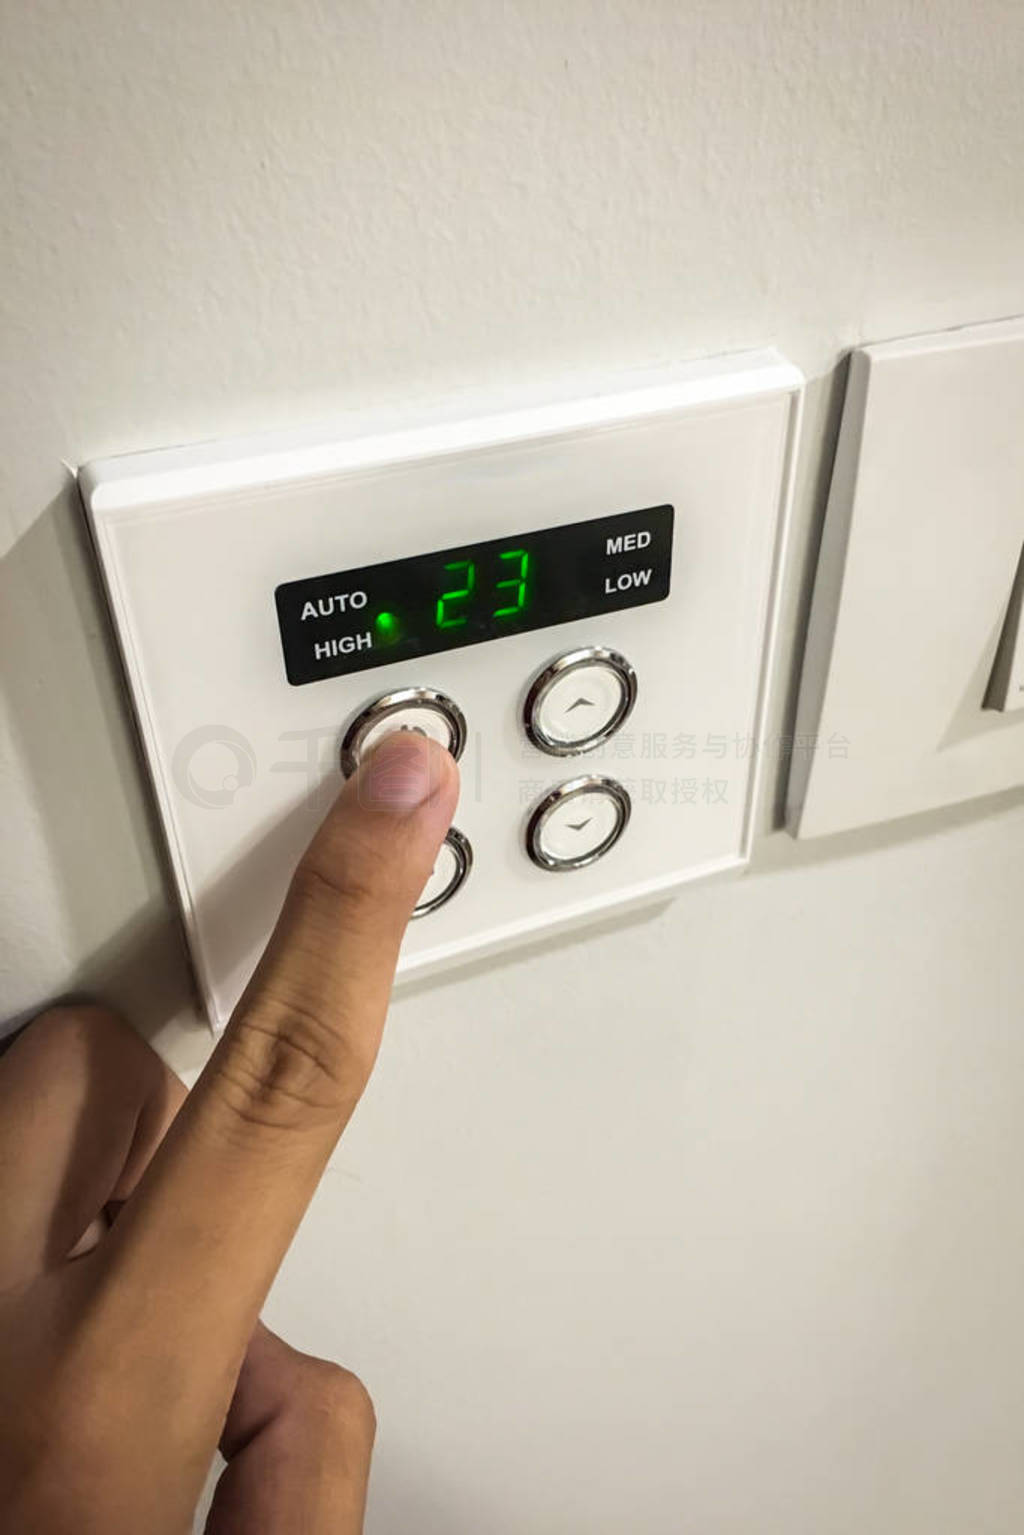 A right hand switches on the air conditioning system